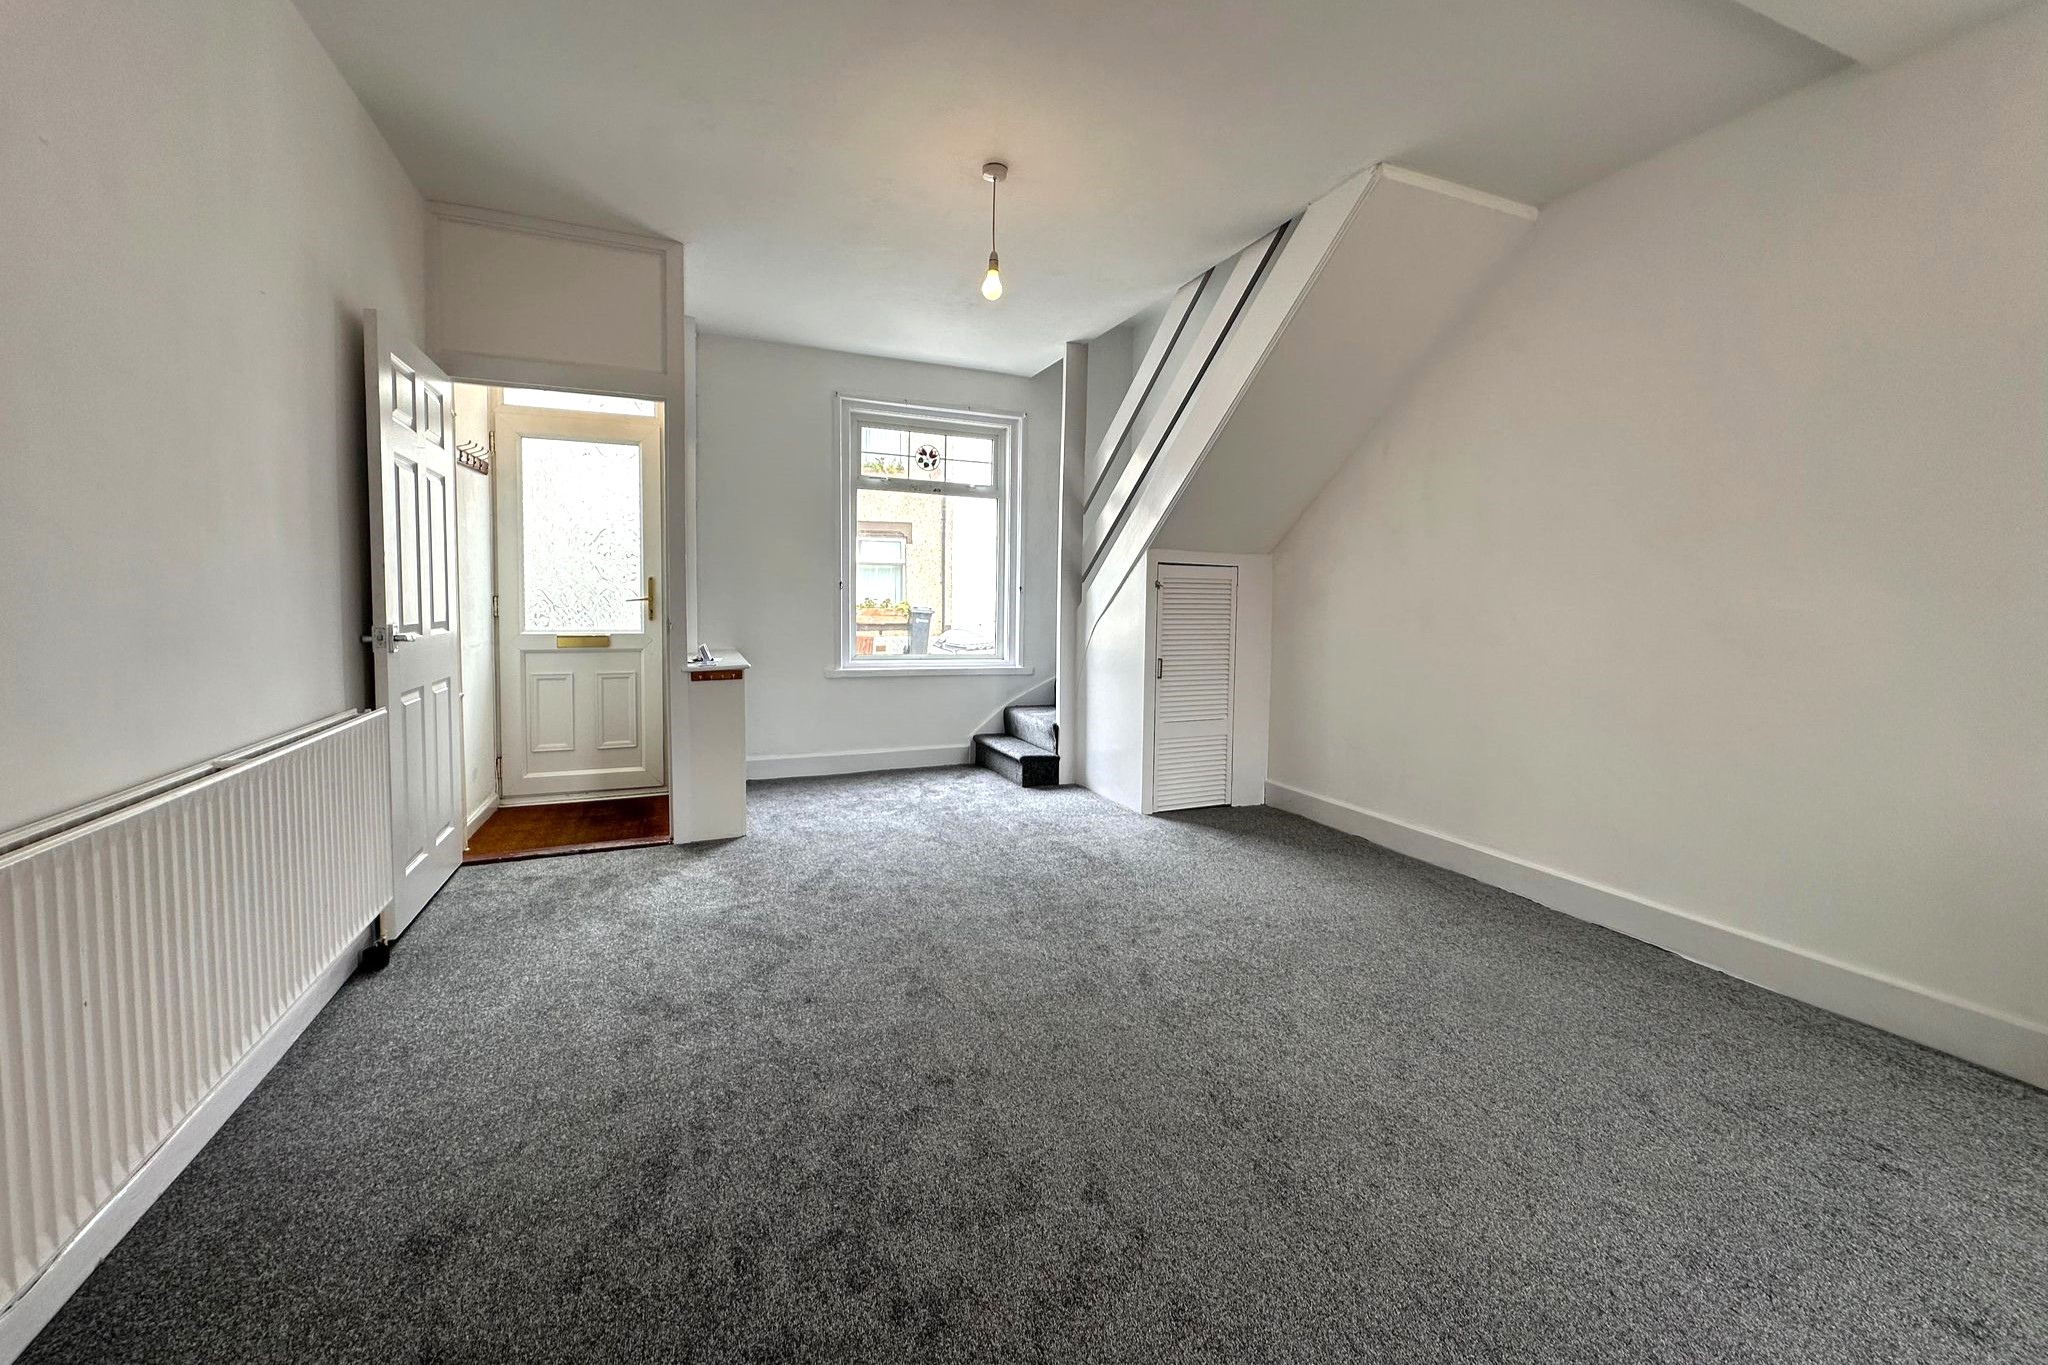 2 bed End Terraced House for rent in Southsea. From Pearsons Estate Agents - Southsea